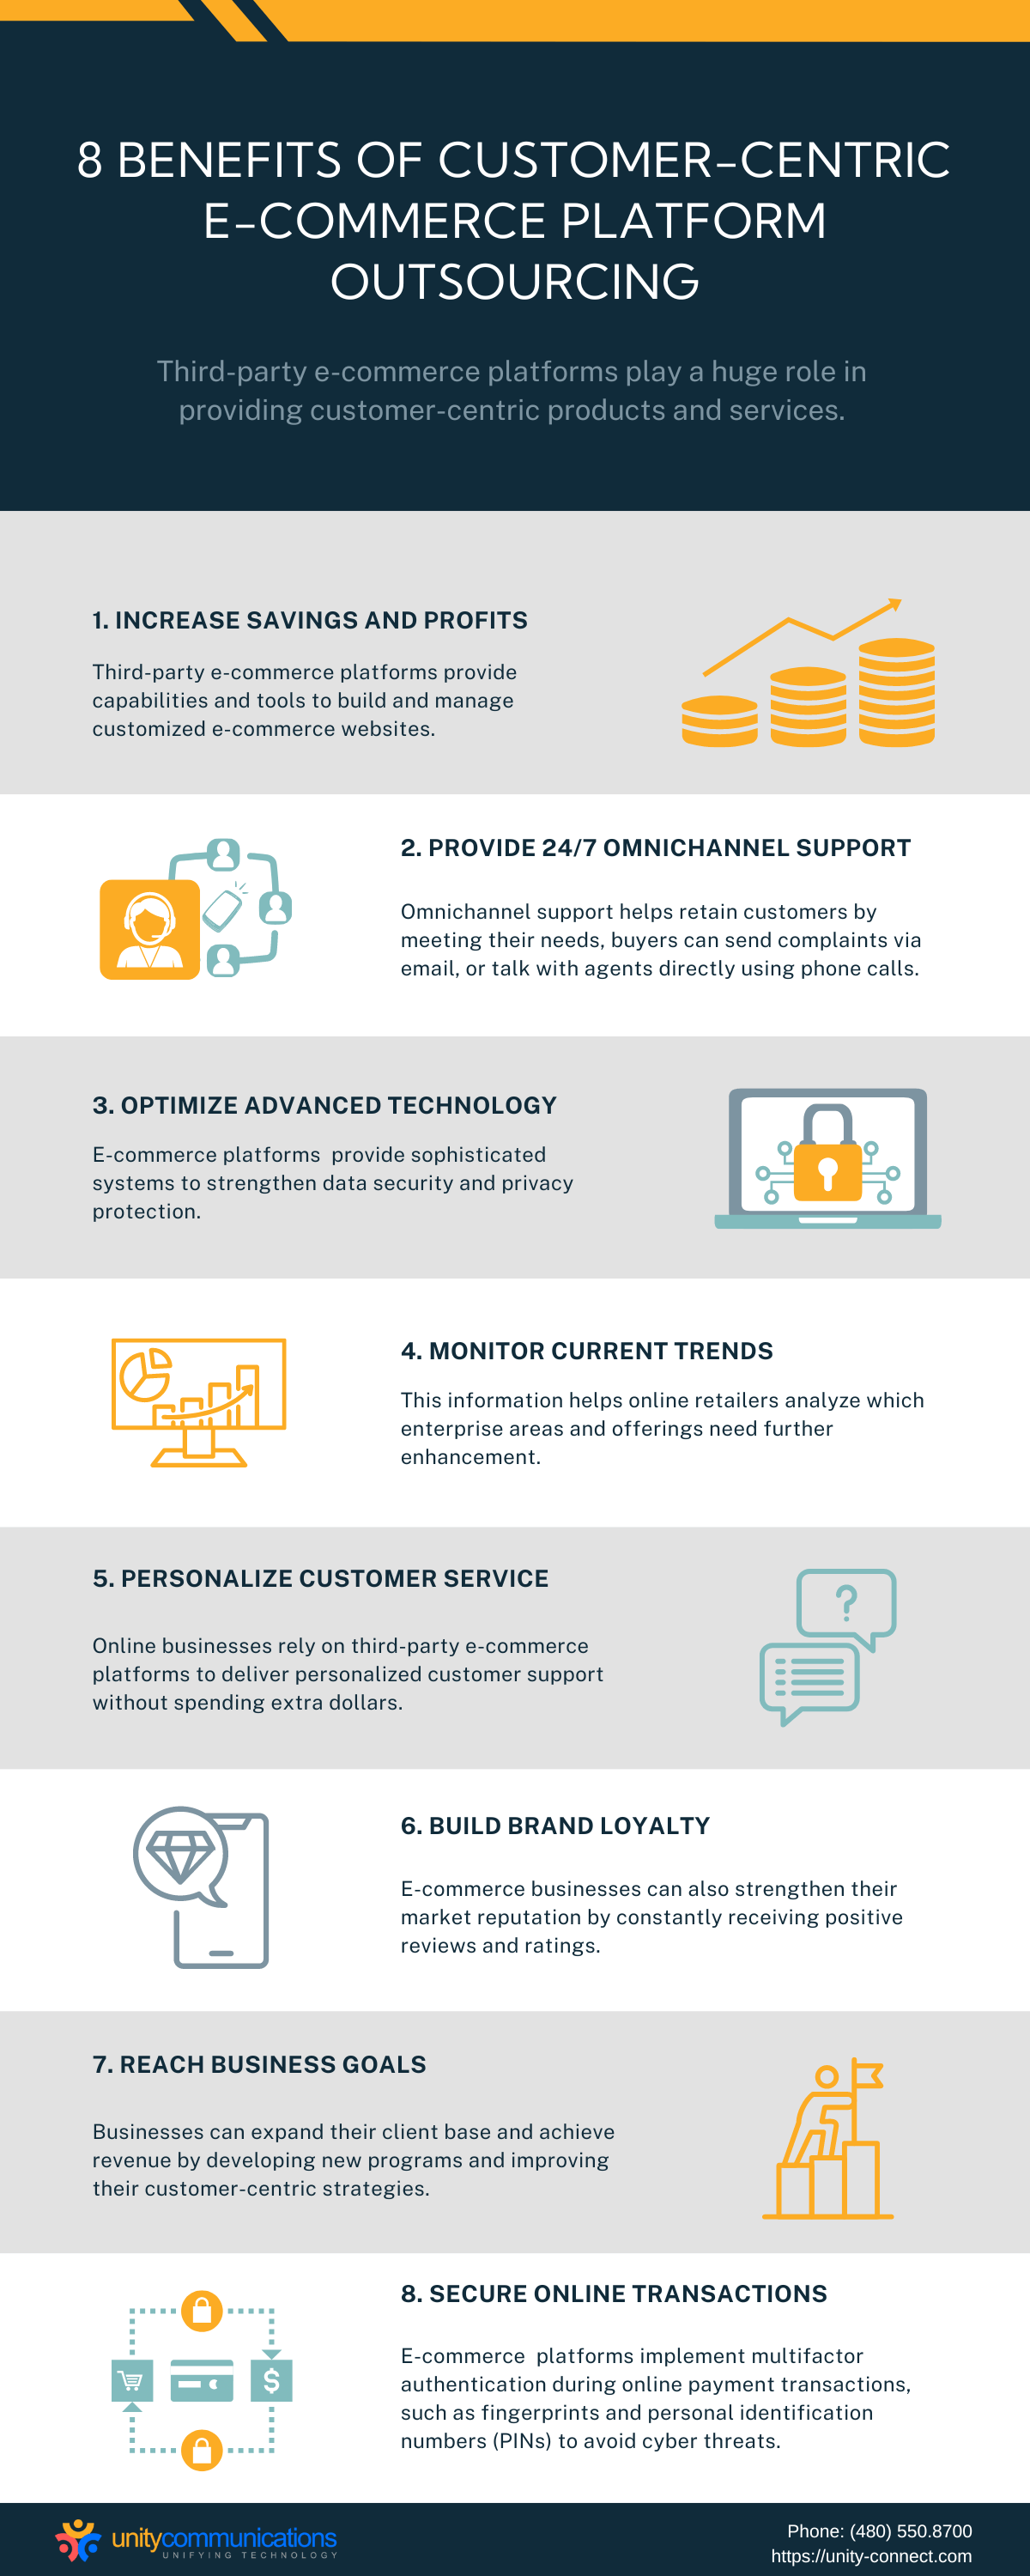 Infographic: Eight Benefits of Customer-centric E-commerce Platform Outsourcing